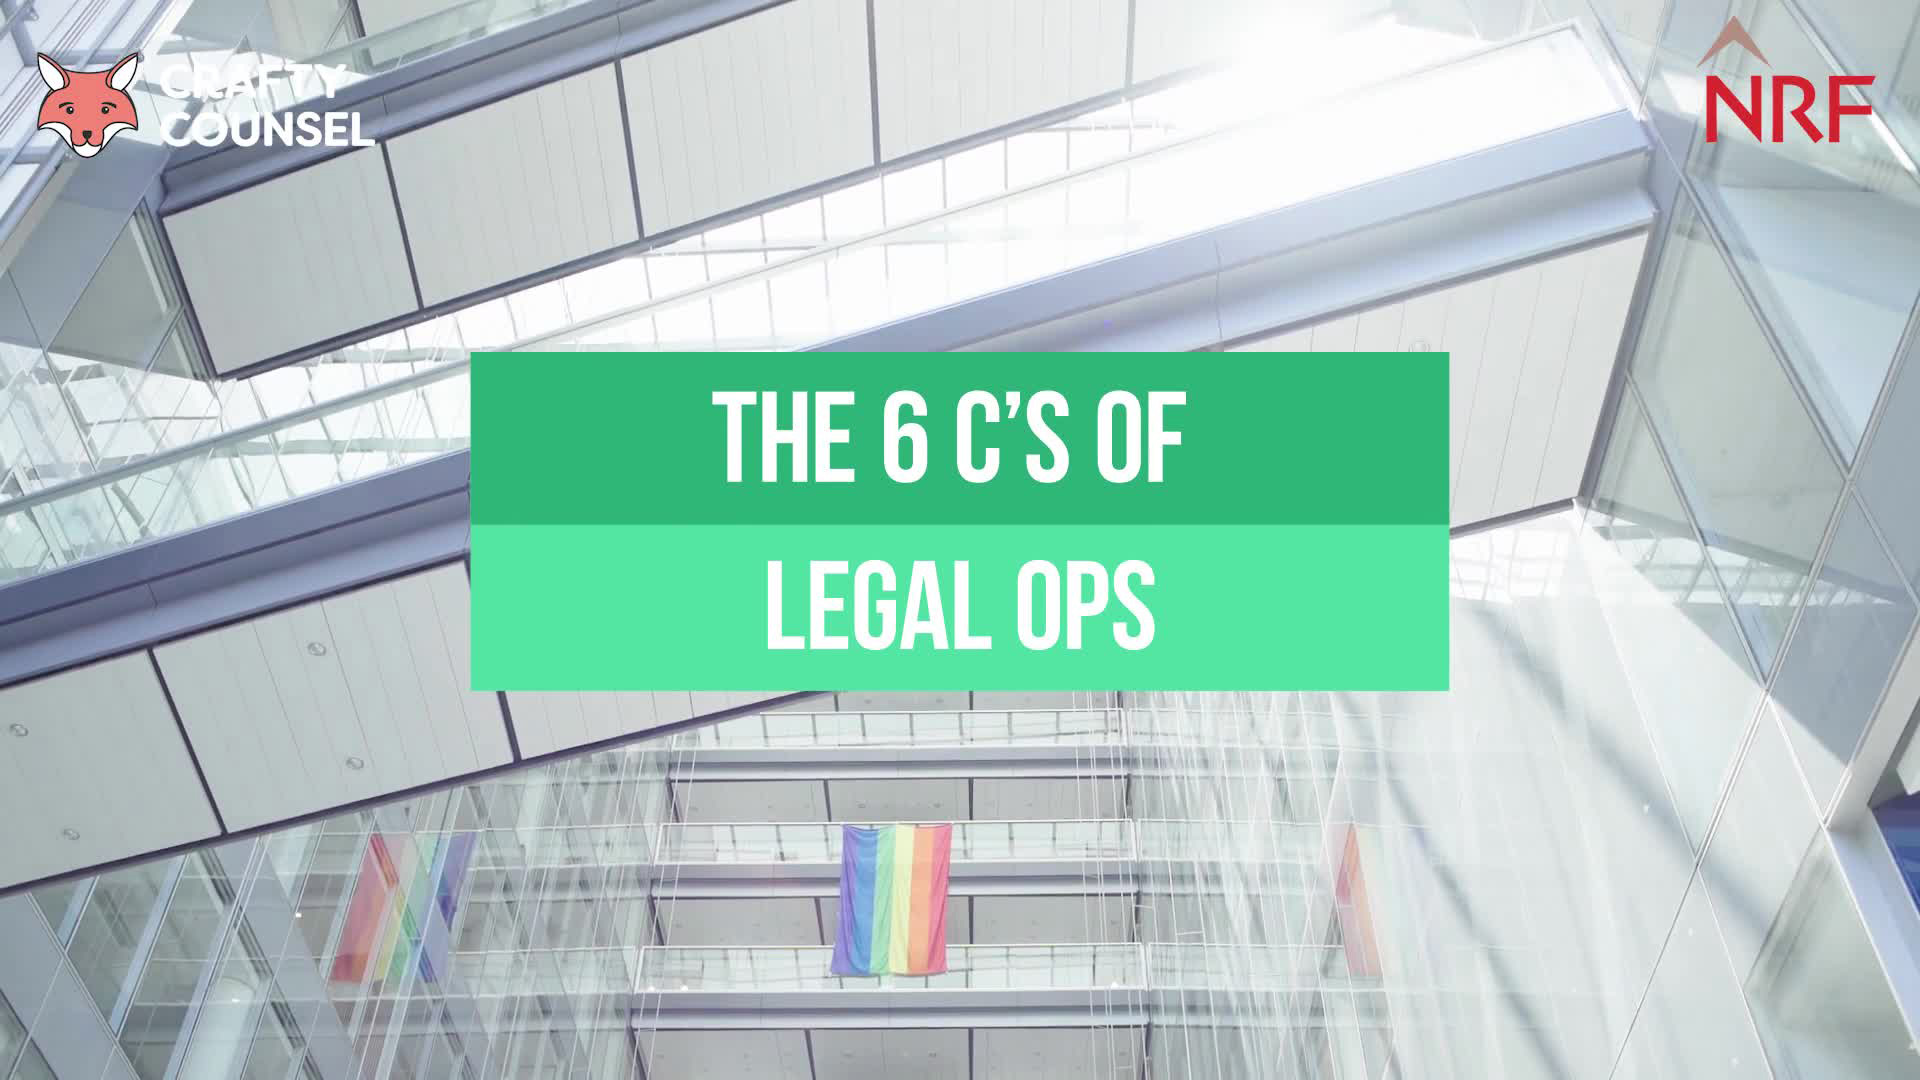 The 6 C’s of Legal Ops